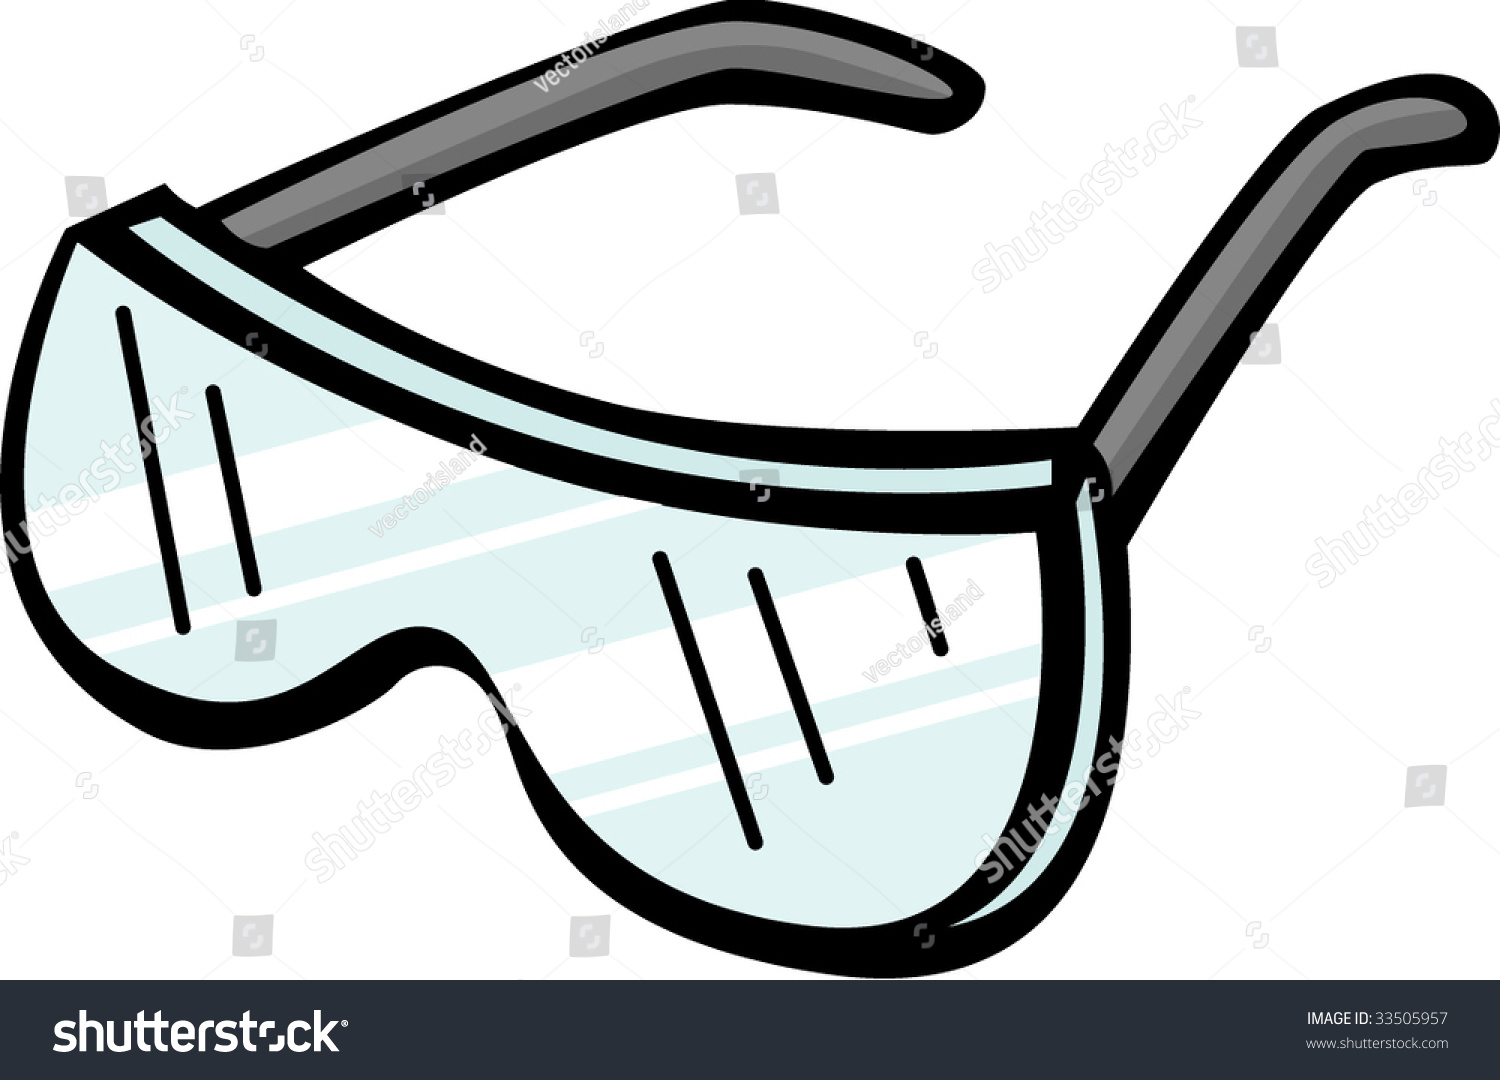 safety goggles clipart - photo #27